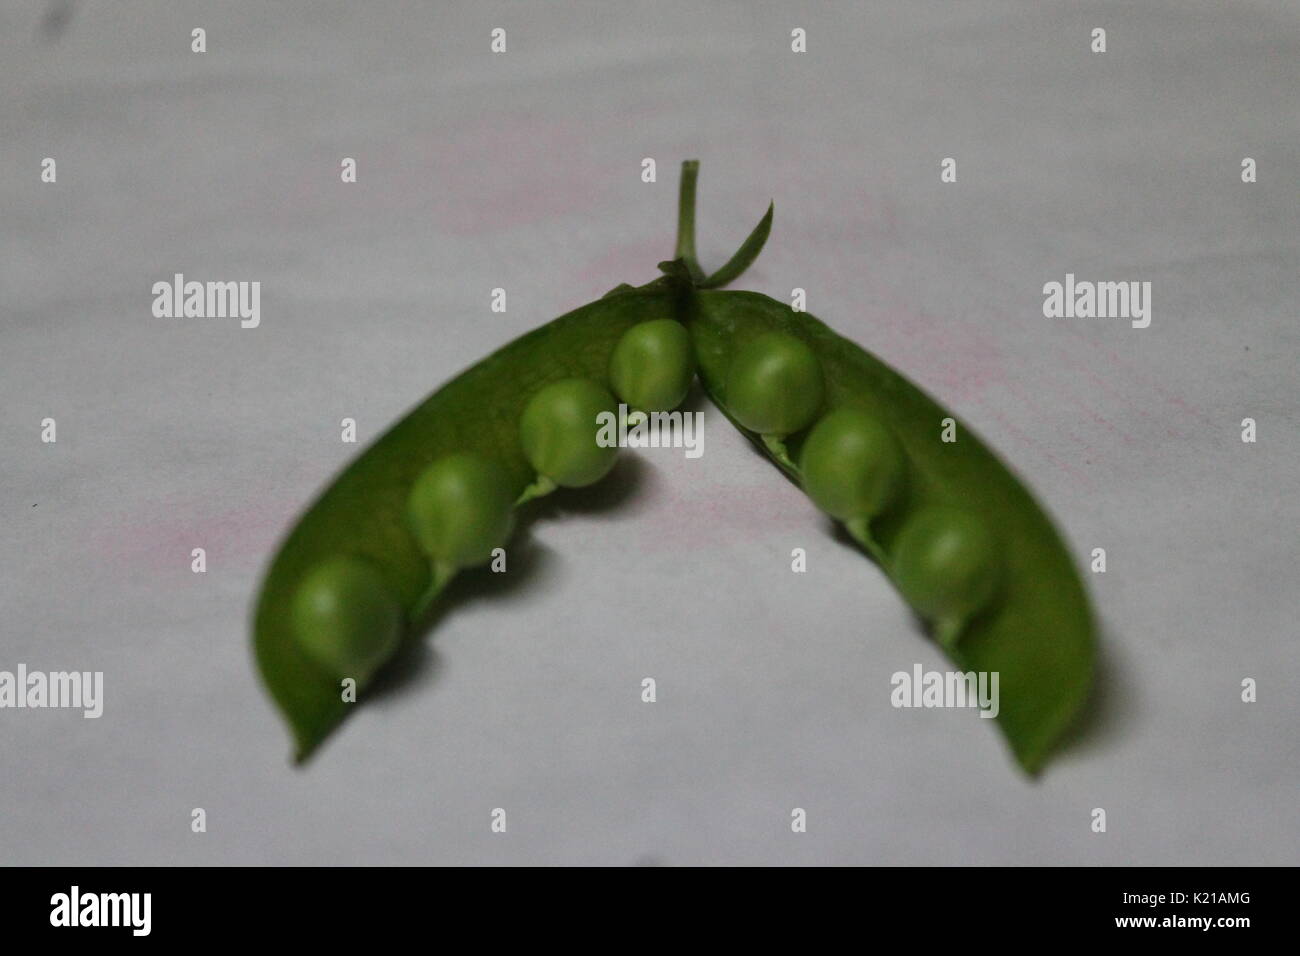 young sweet green color peas in pod prepare for cooking Stock Photo